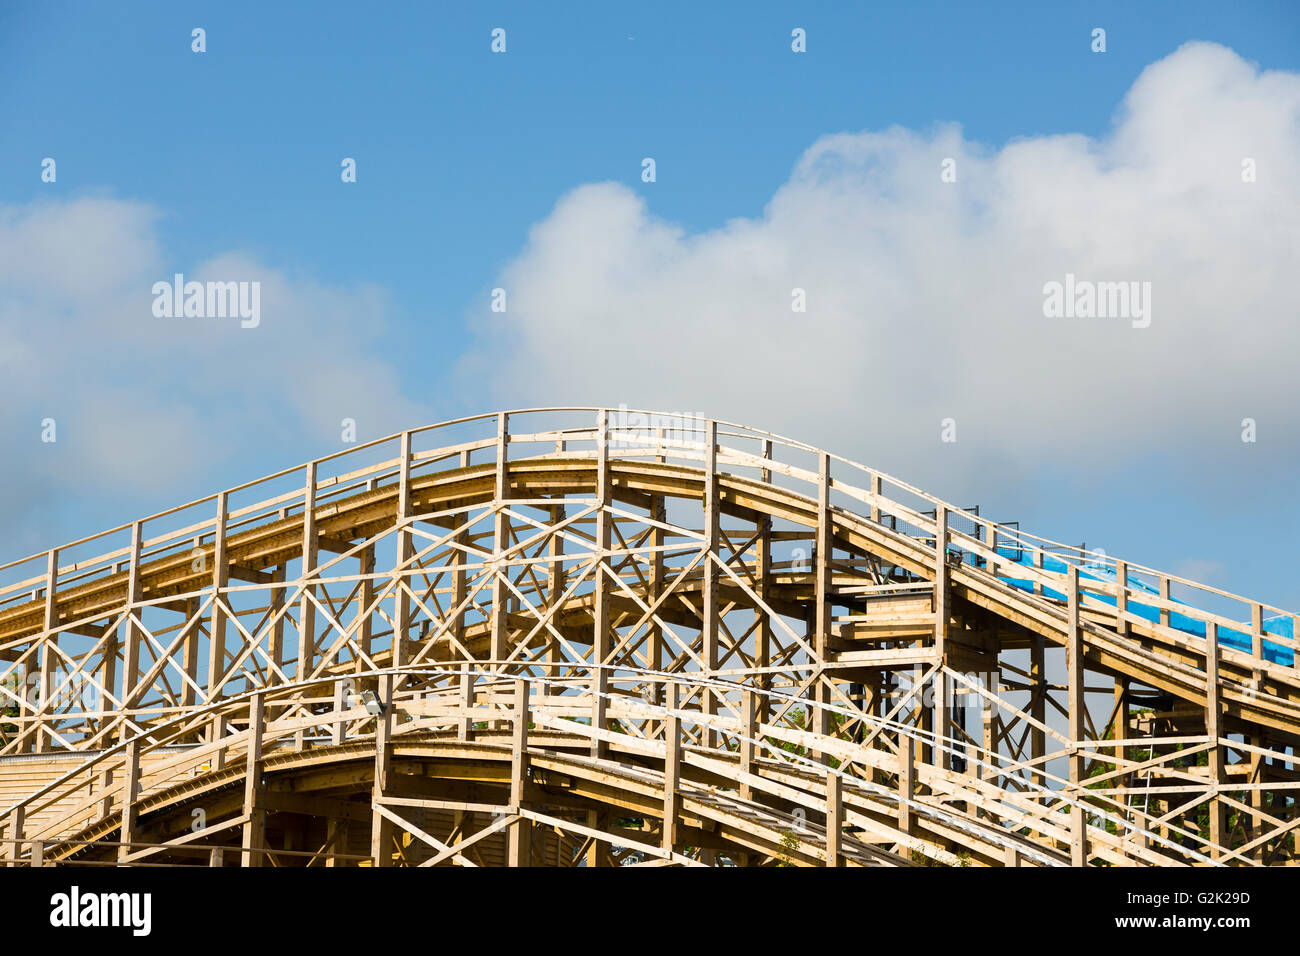 Margate, UK. The curves and undulations of the all-wood Scenic Railway ...